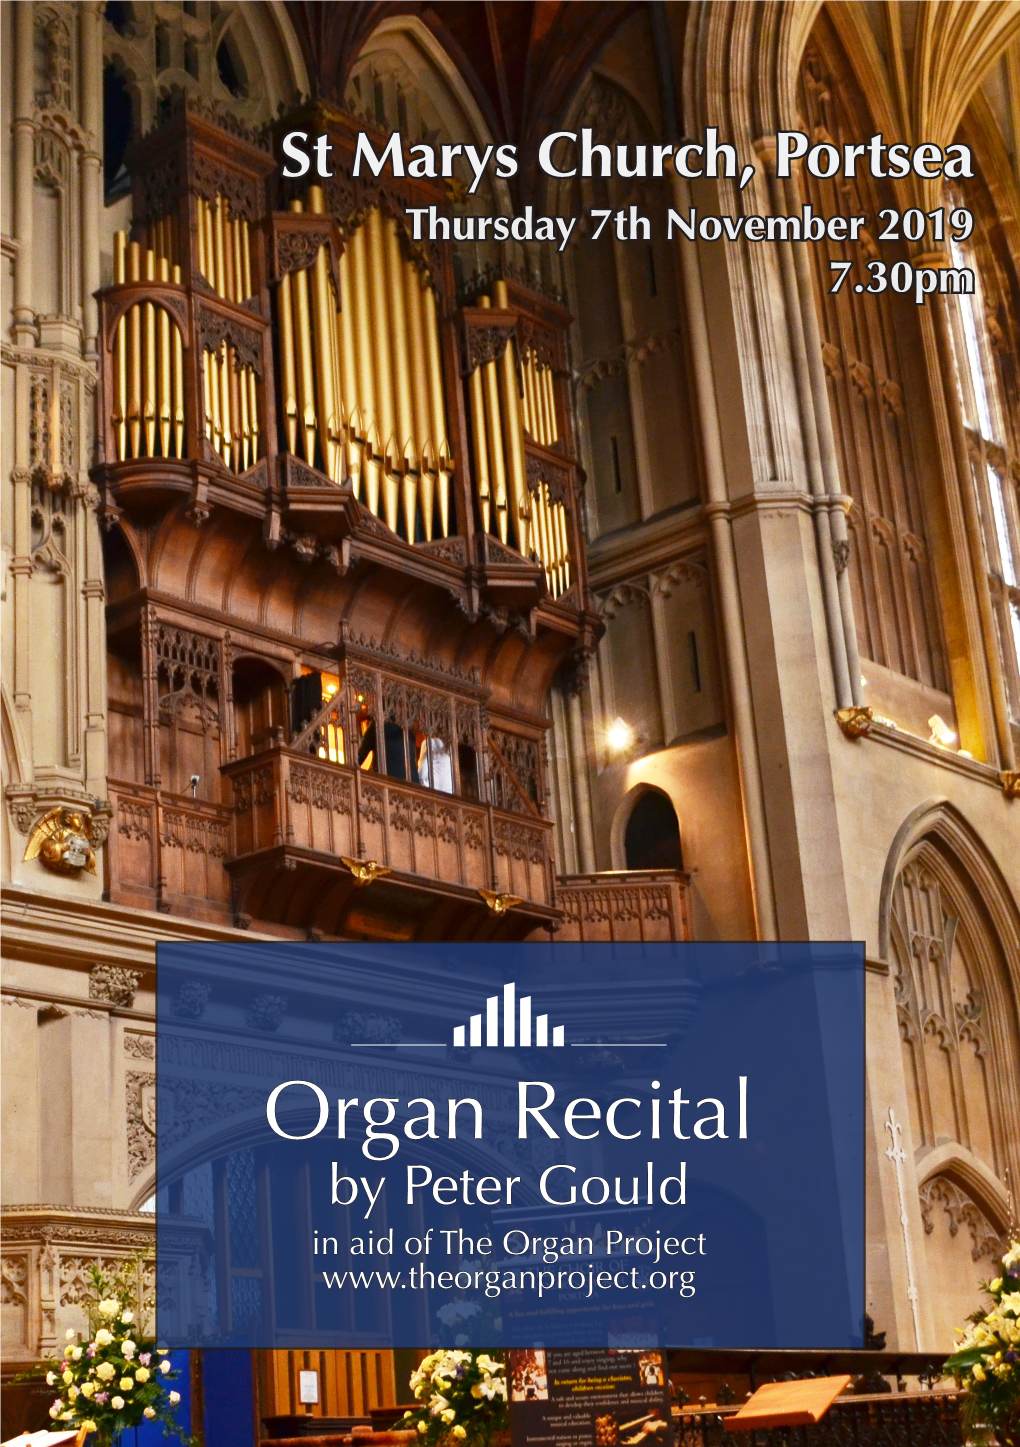 Organ Recital by Peter Gould in Aid of the Organ Project Programme Toccata and Fugue in F Major Johann Sebastian Bach BWV 540 (1685-1750)